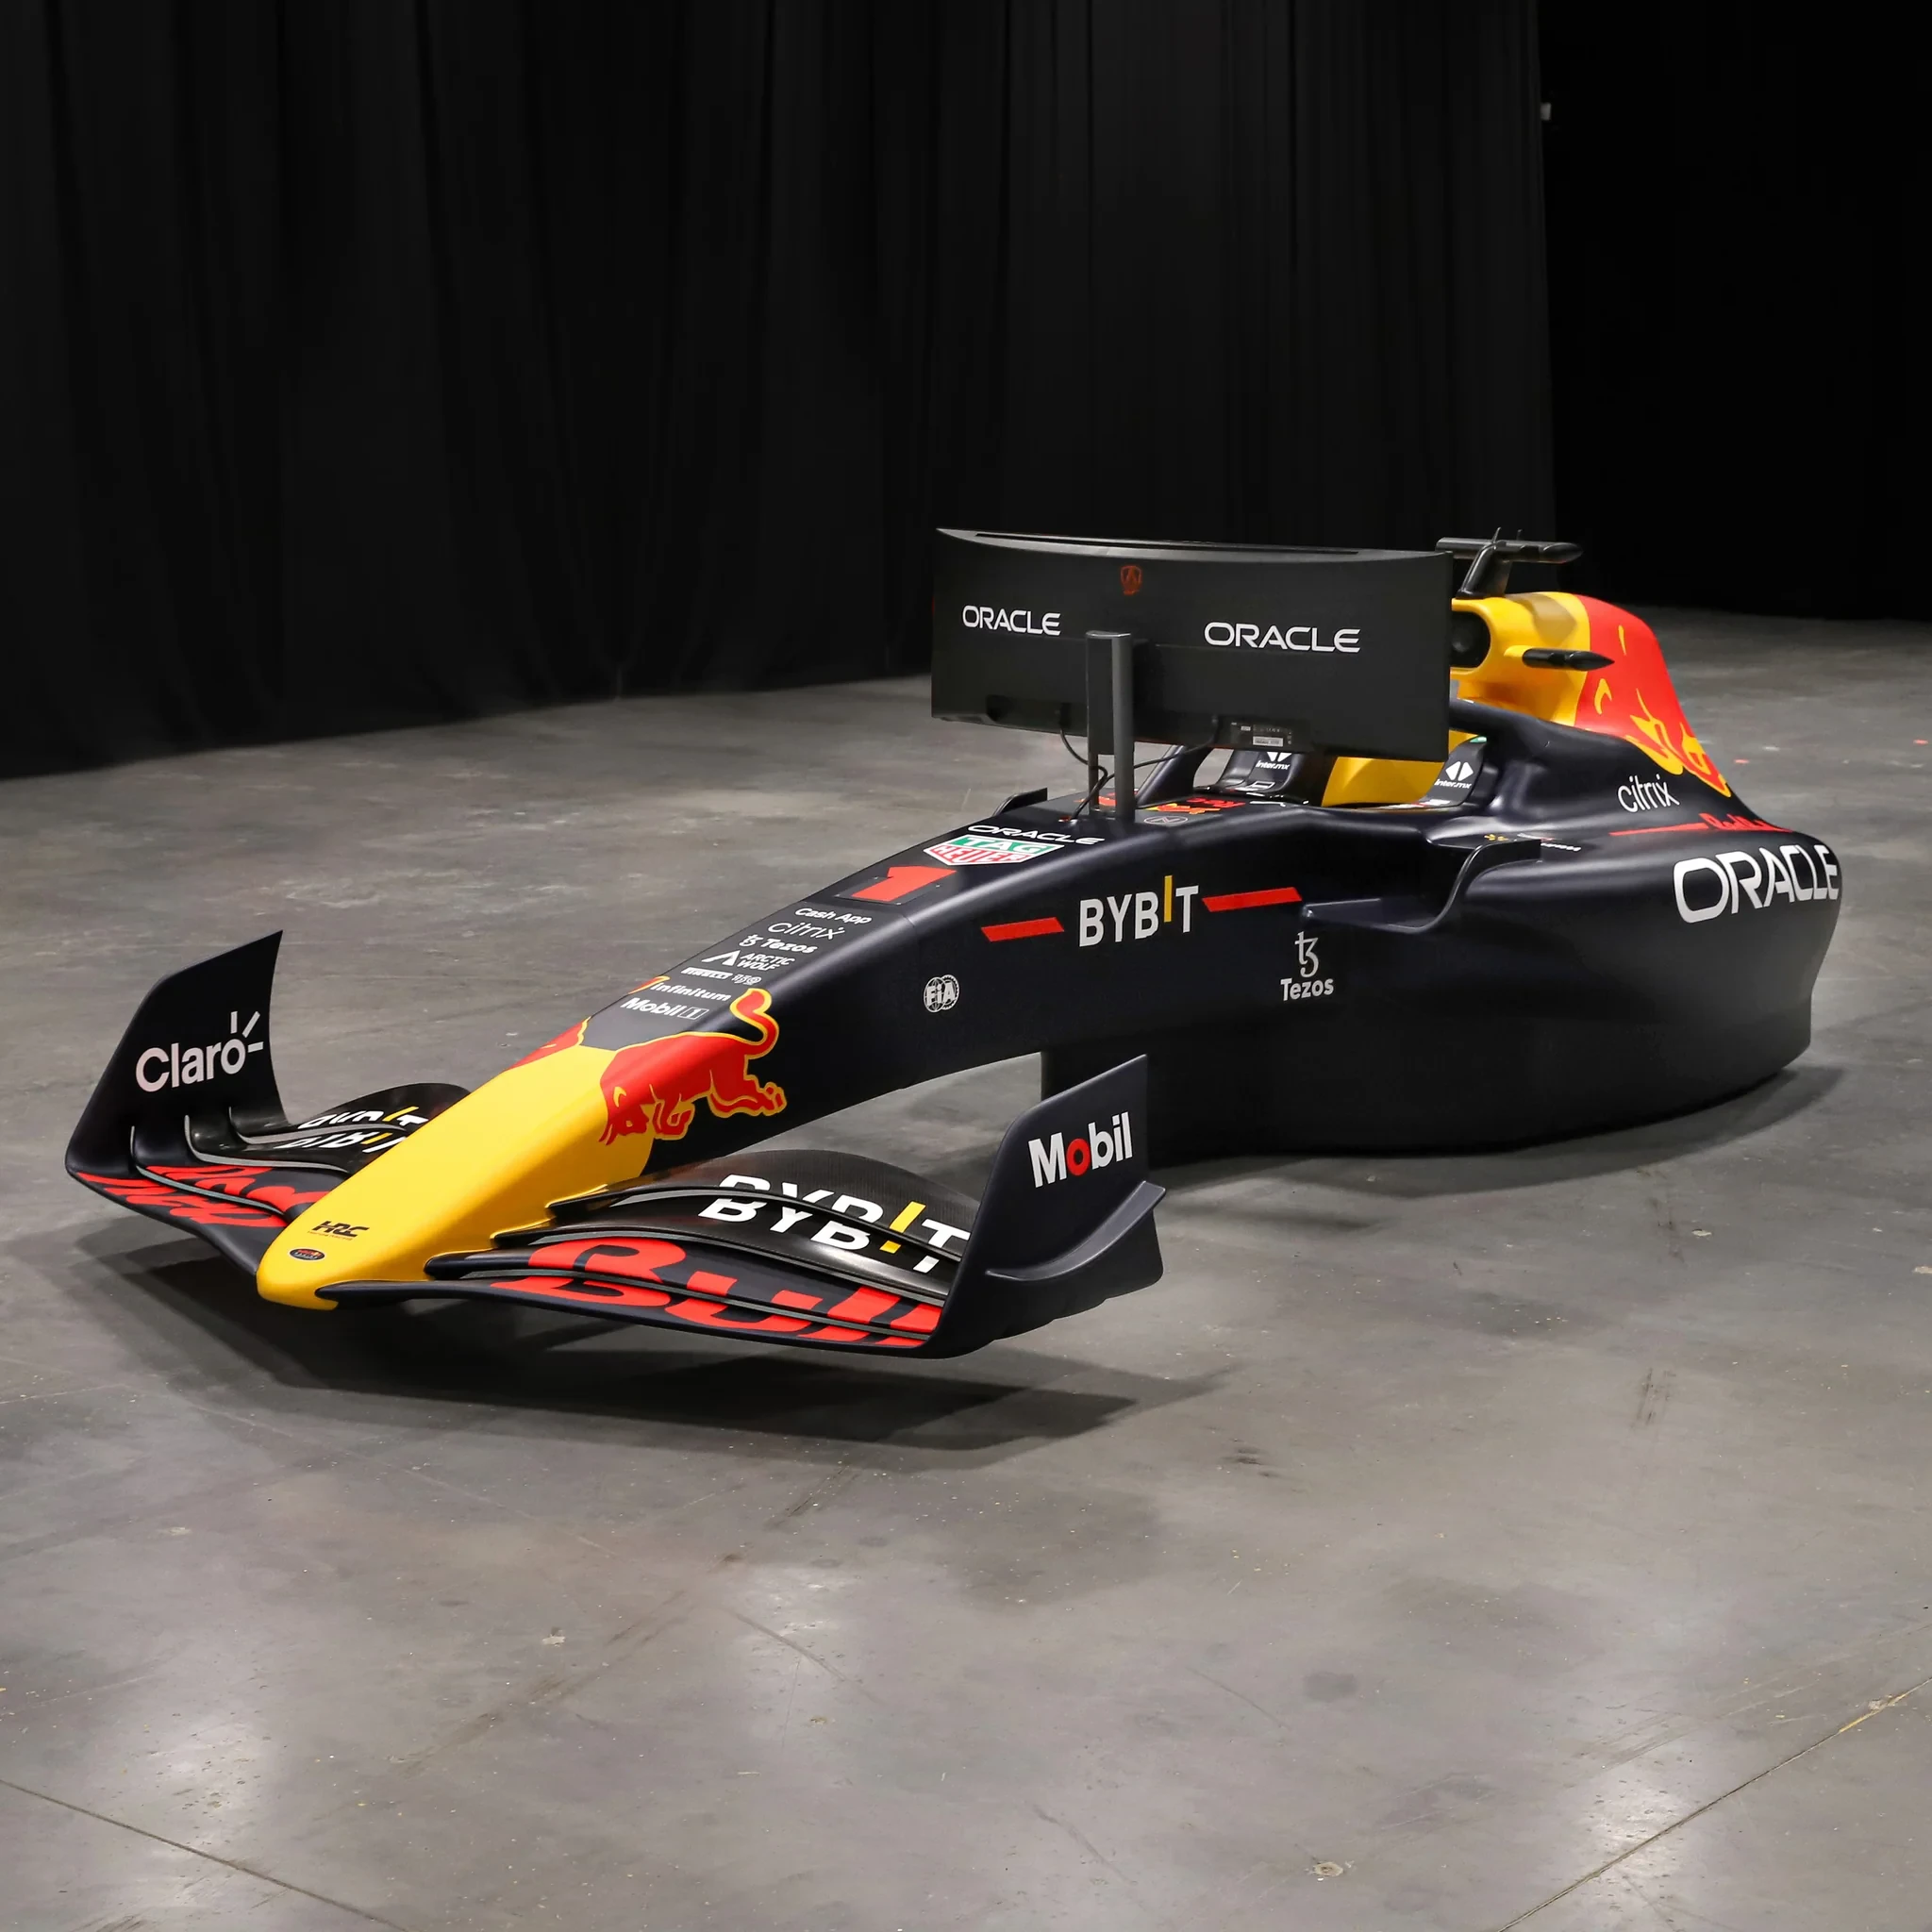 F1 Red Bull Racing Simulators Bring the Driving Experience to Your Livingroom at a Price